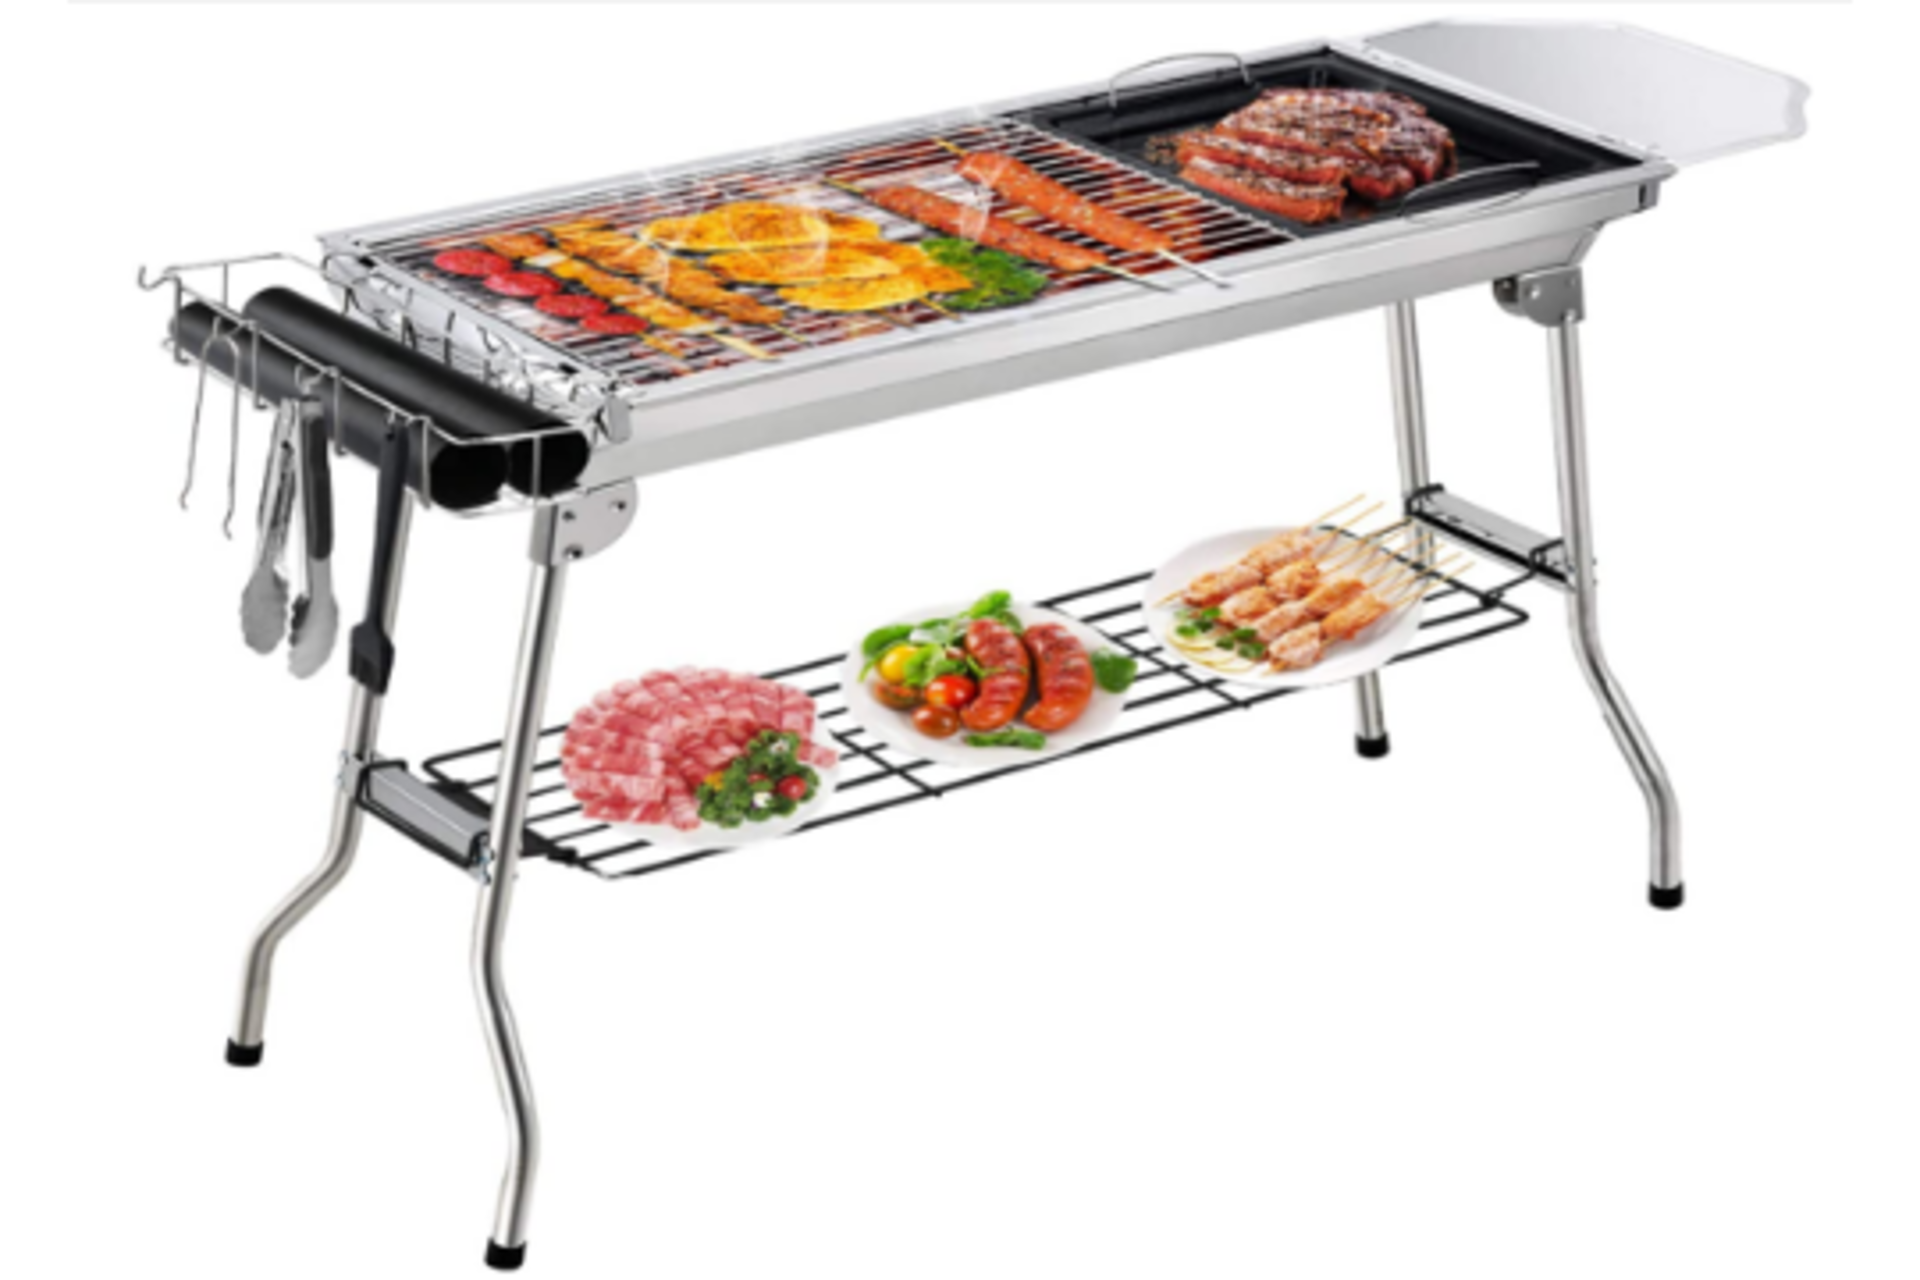 PALLET TO CONTAIN 10 X BRAND NEW LARGE BBQ GRILL WITH UNDER STORAGE SHELF RRP £220